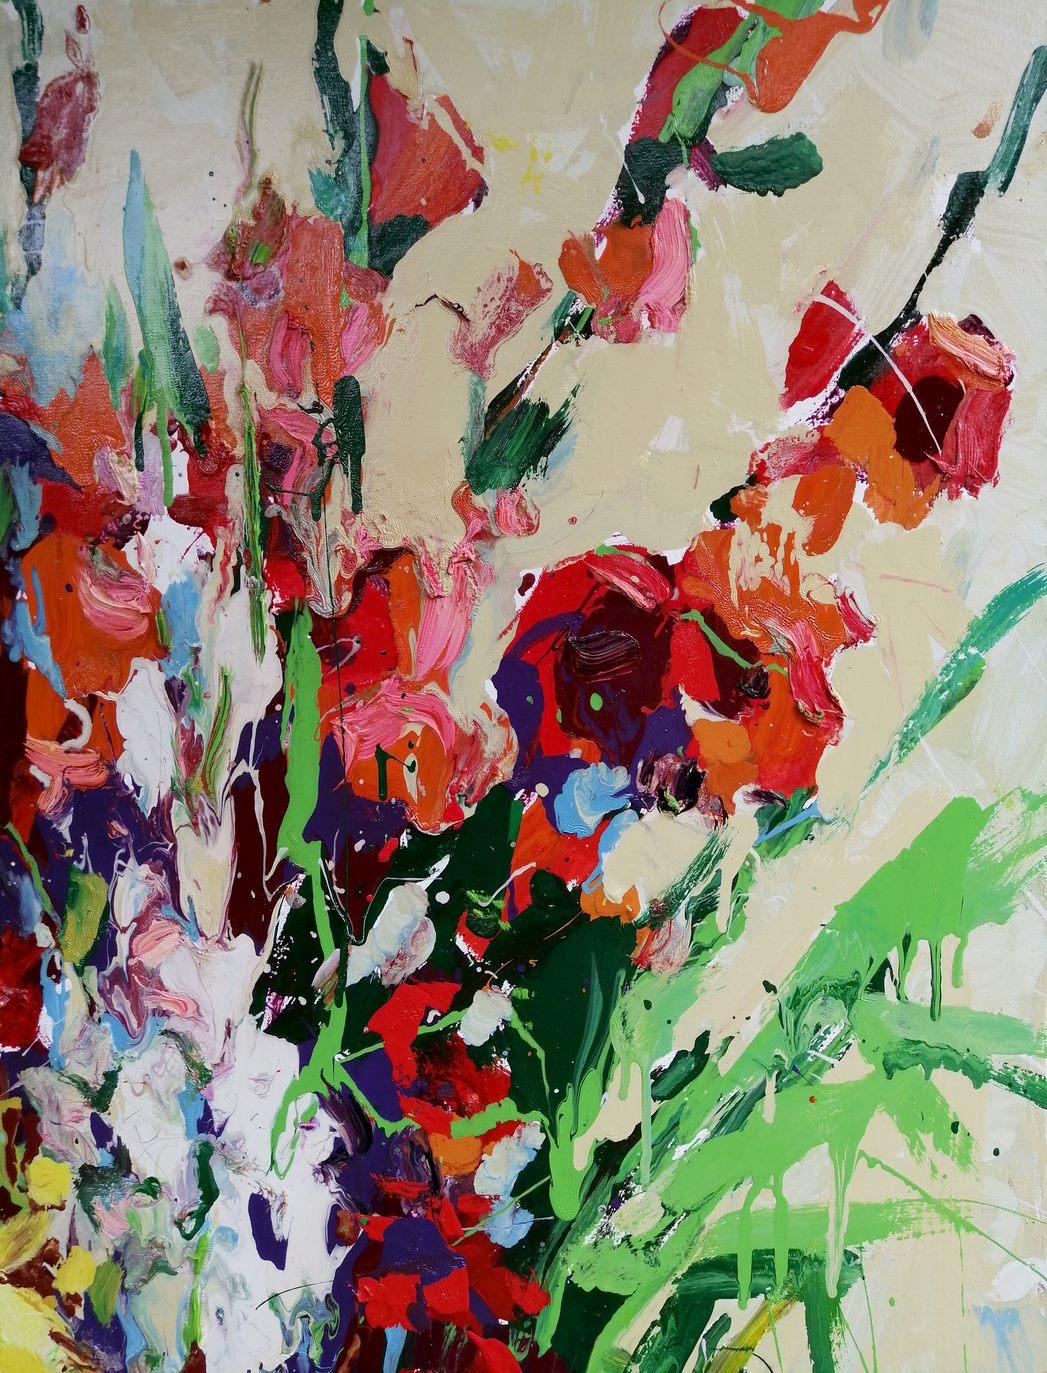 Artist: Alex Kalenyuk 
Work: Original oil painting, handmade artwork, one of a kind 
Medium: Oil on canvas 
Year: 2018
Style: Impressionism
Title: Still life with Flowers, 
Size: 47.5